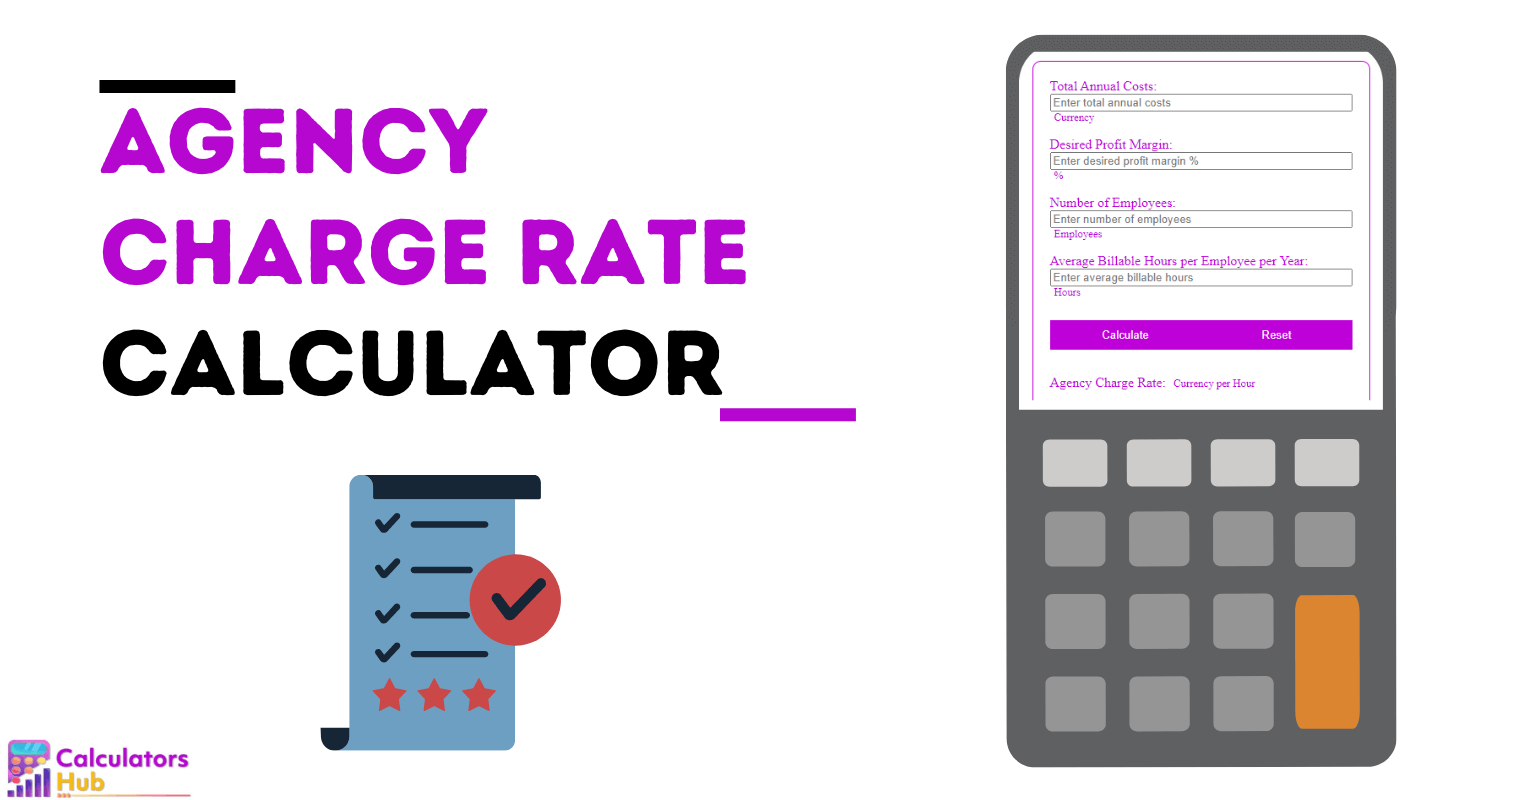 Agency Charge Rate Calculator